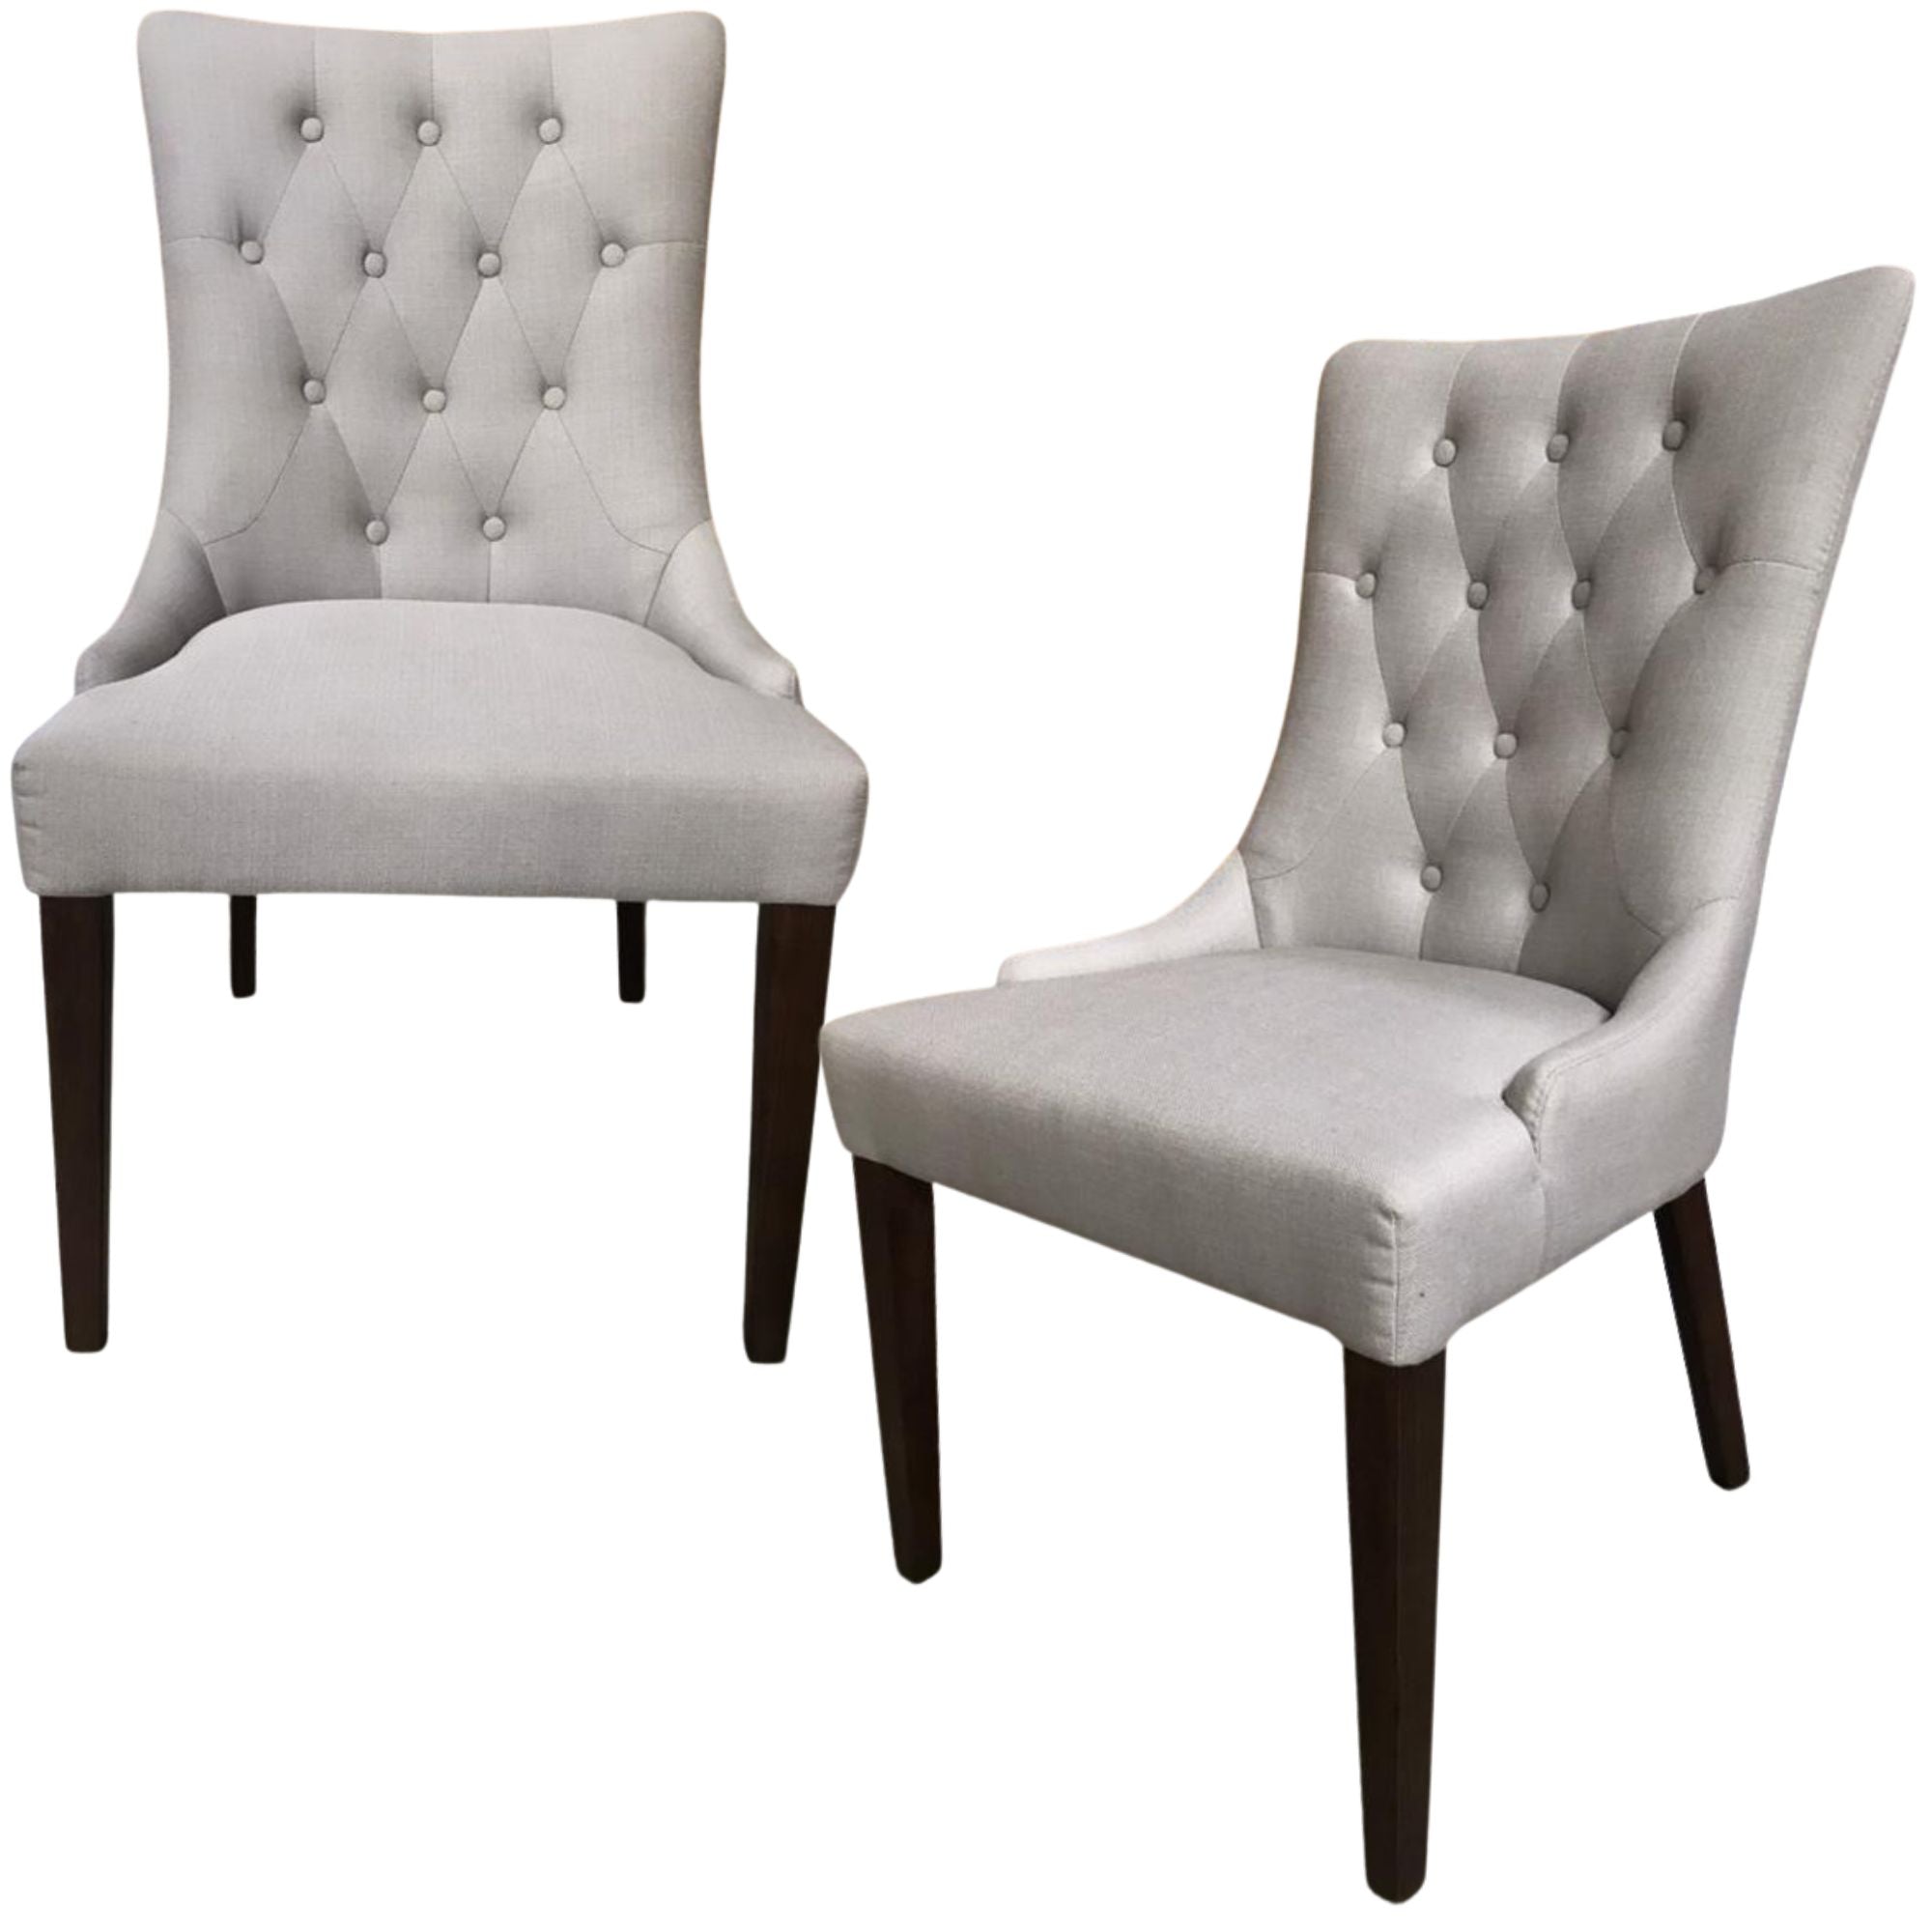 Classic French Provincial Dining Chairs - Set of 2 with Solid Timber Wood